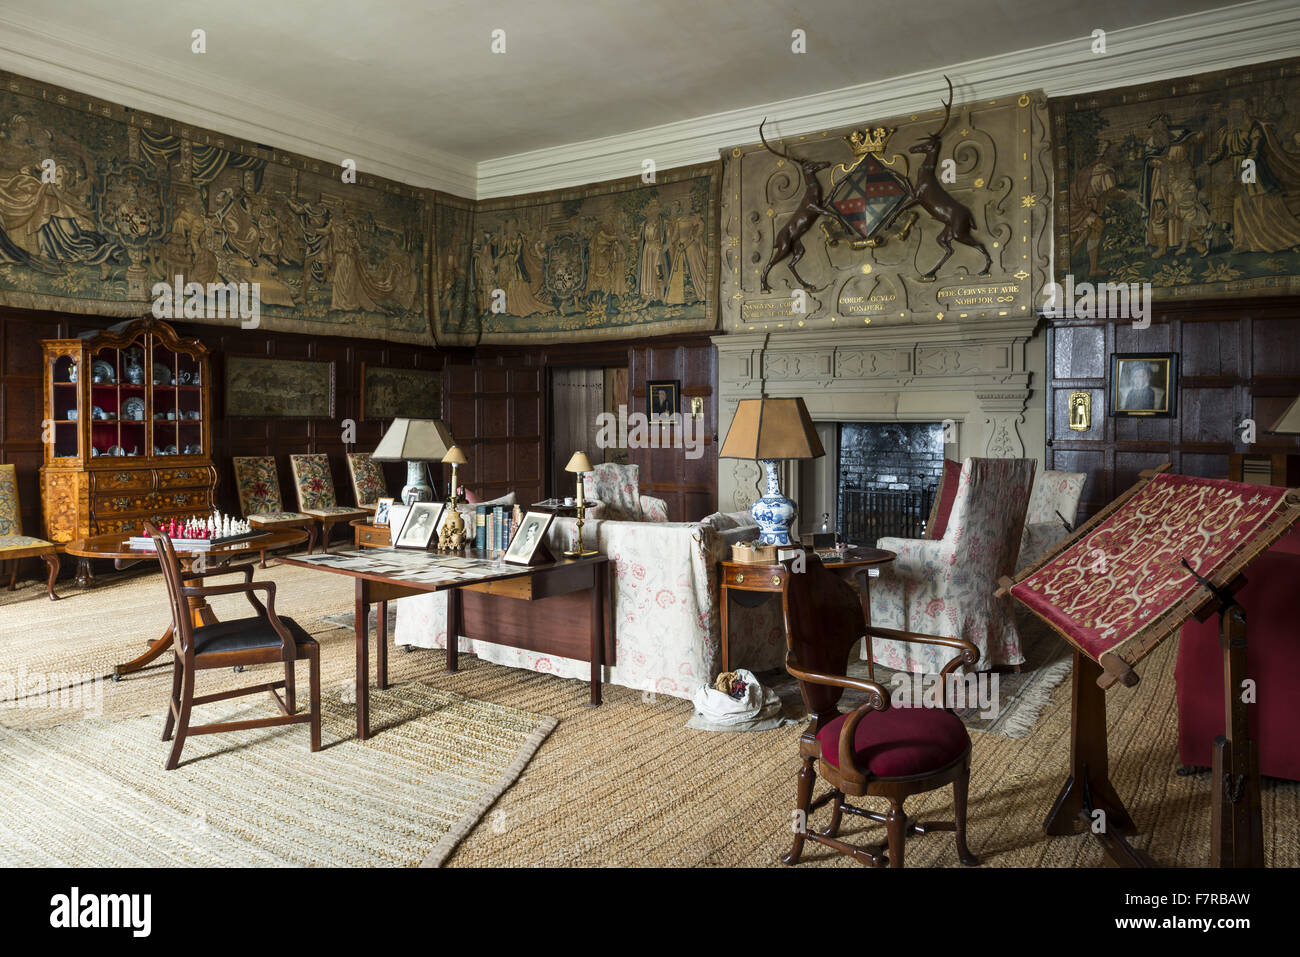 The Drawing Room at Hardwick Hall, Derbyshire. Hardwick Hall was built in the late 16th century for Bess of Hardwick. Stock Photo